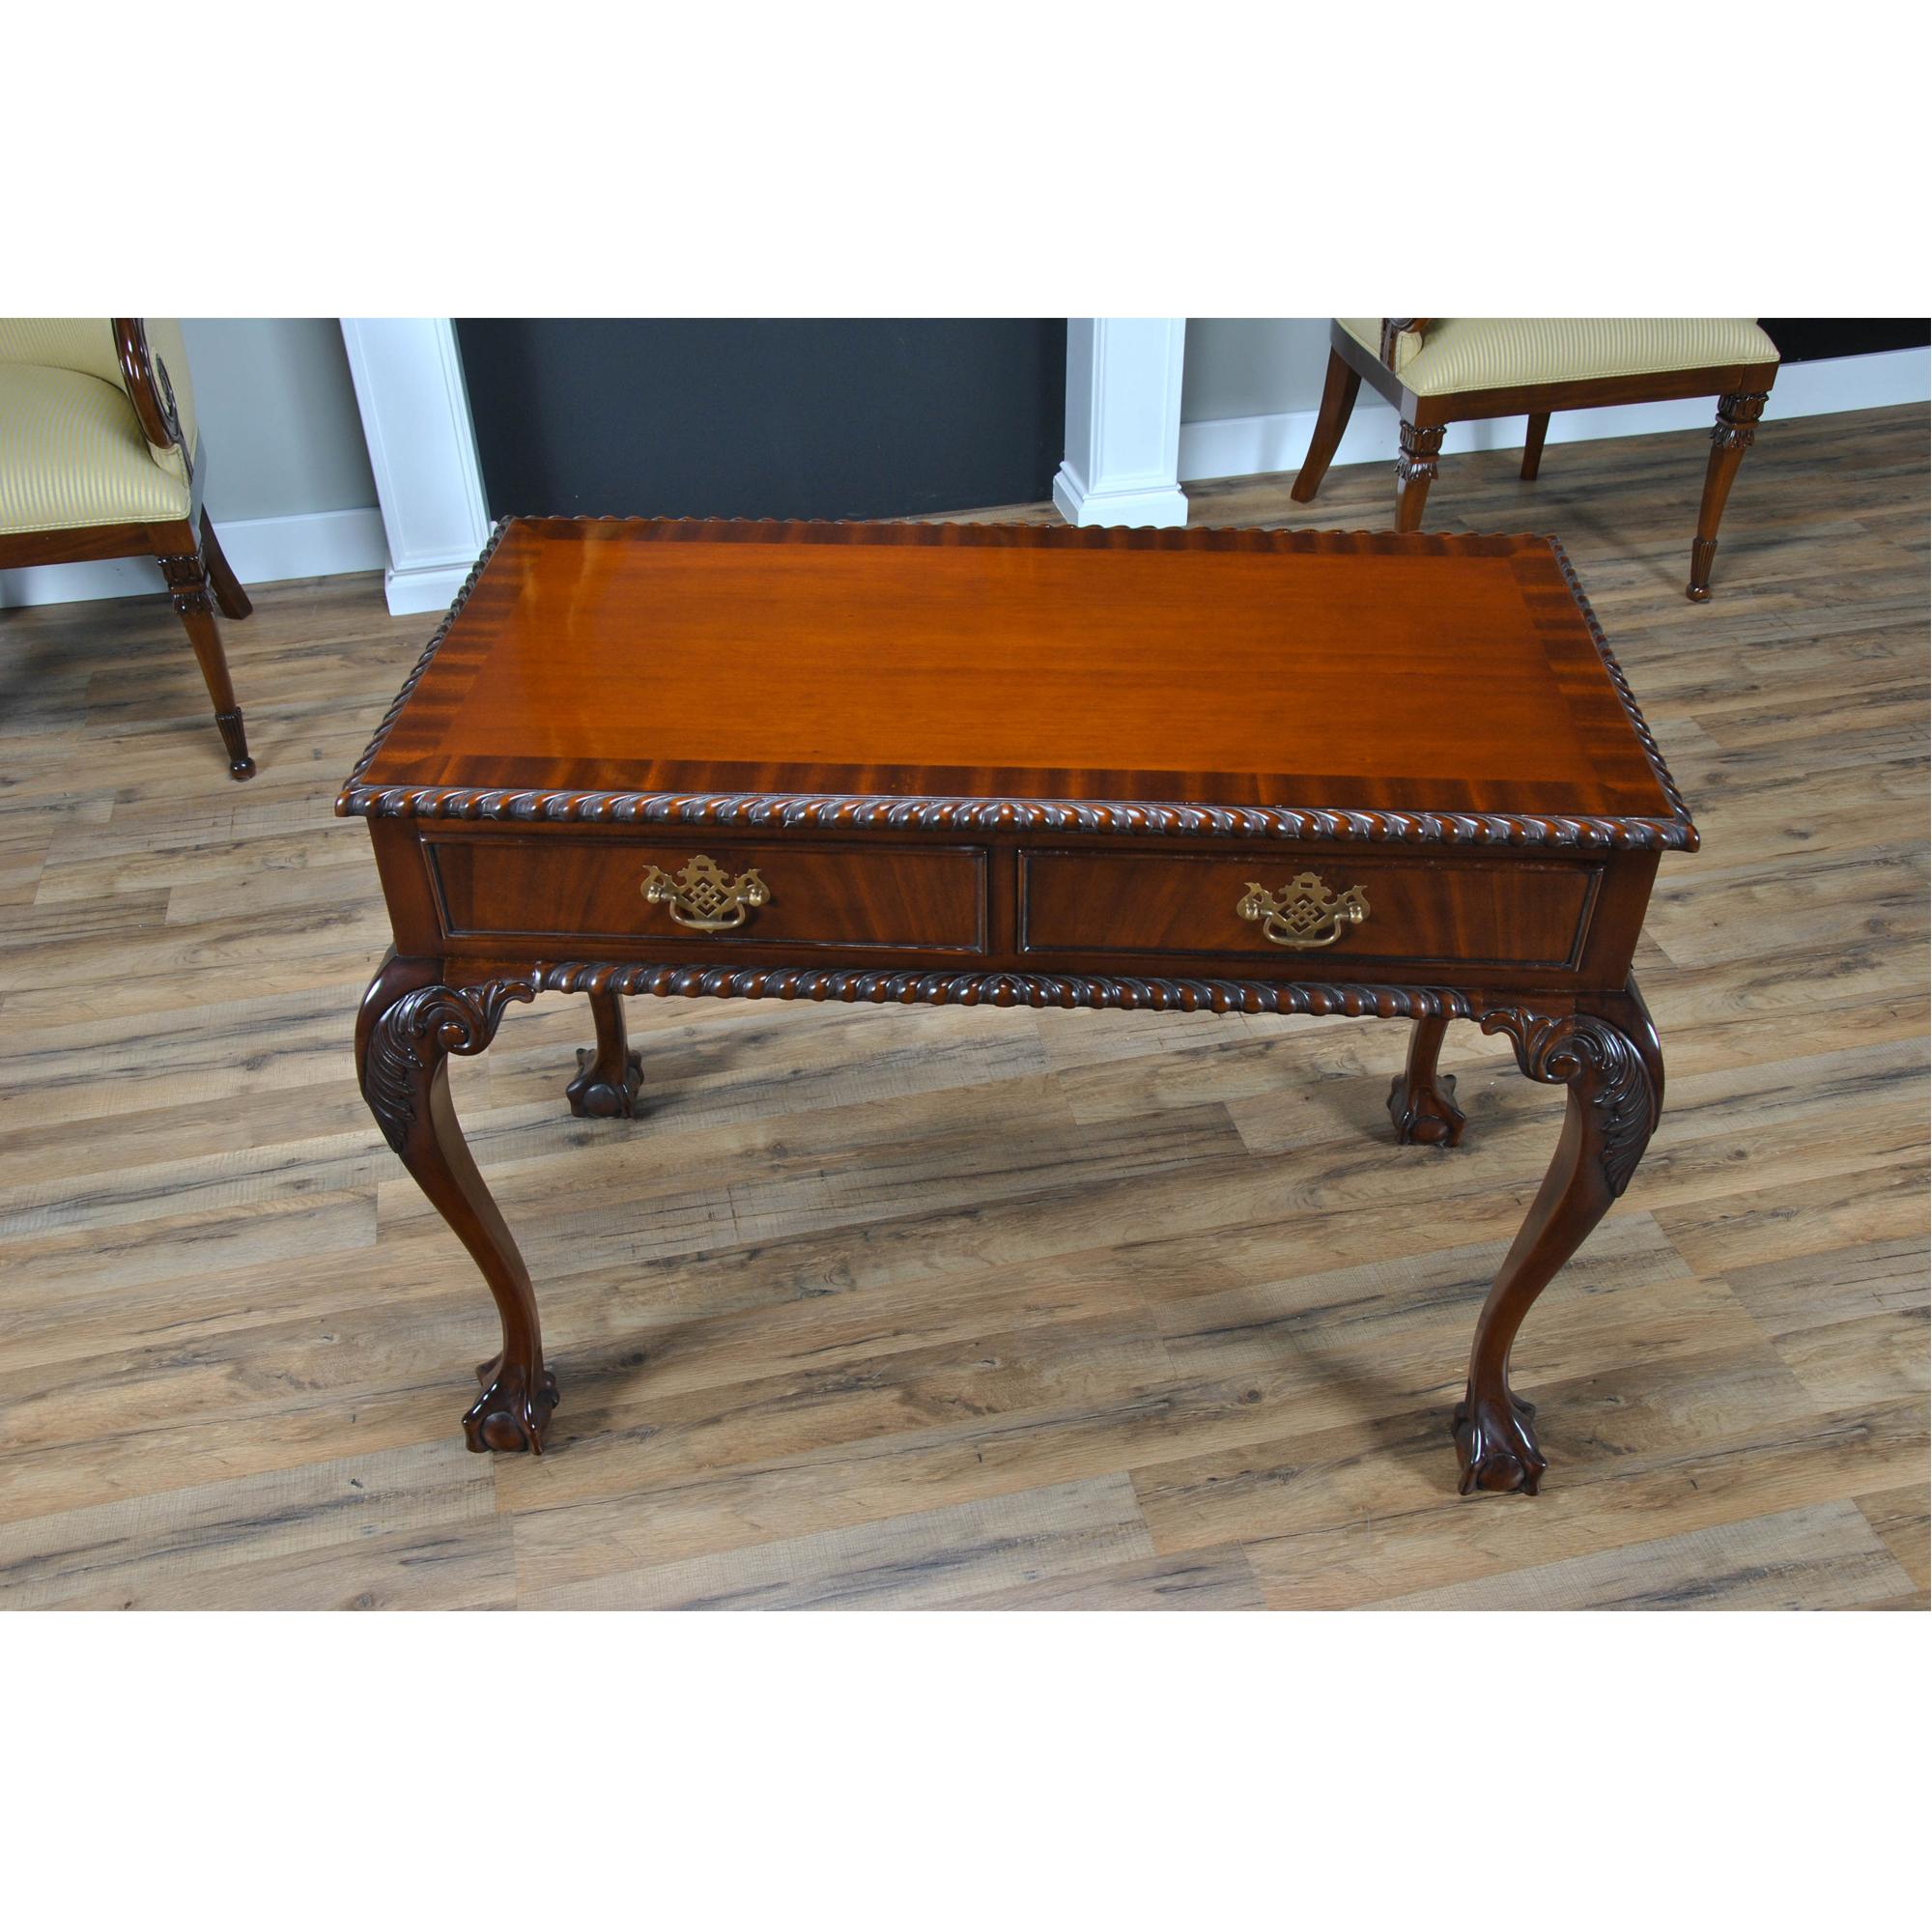 A Chippendale style Mahogany Two Drawer Console with a banded mahogany top, a gadrooned (rope edged)  molding over top a frieze with two dovetailed drawers which feature solid brass pulls. The cabriole legs of our Mahogany Two Drawer Console are